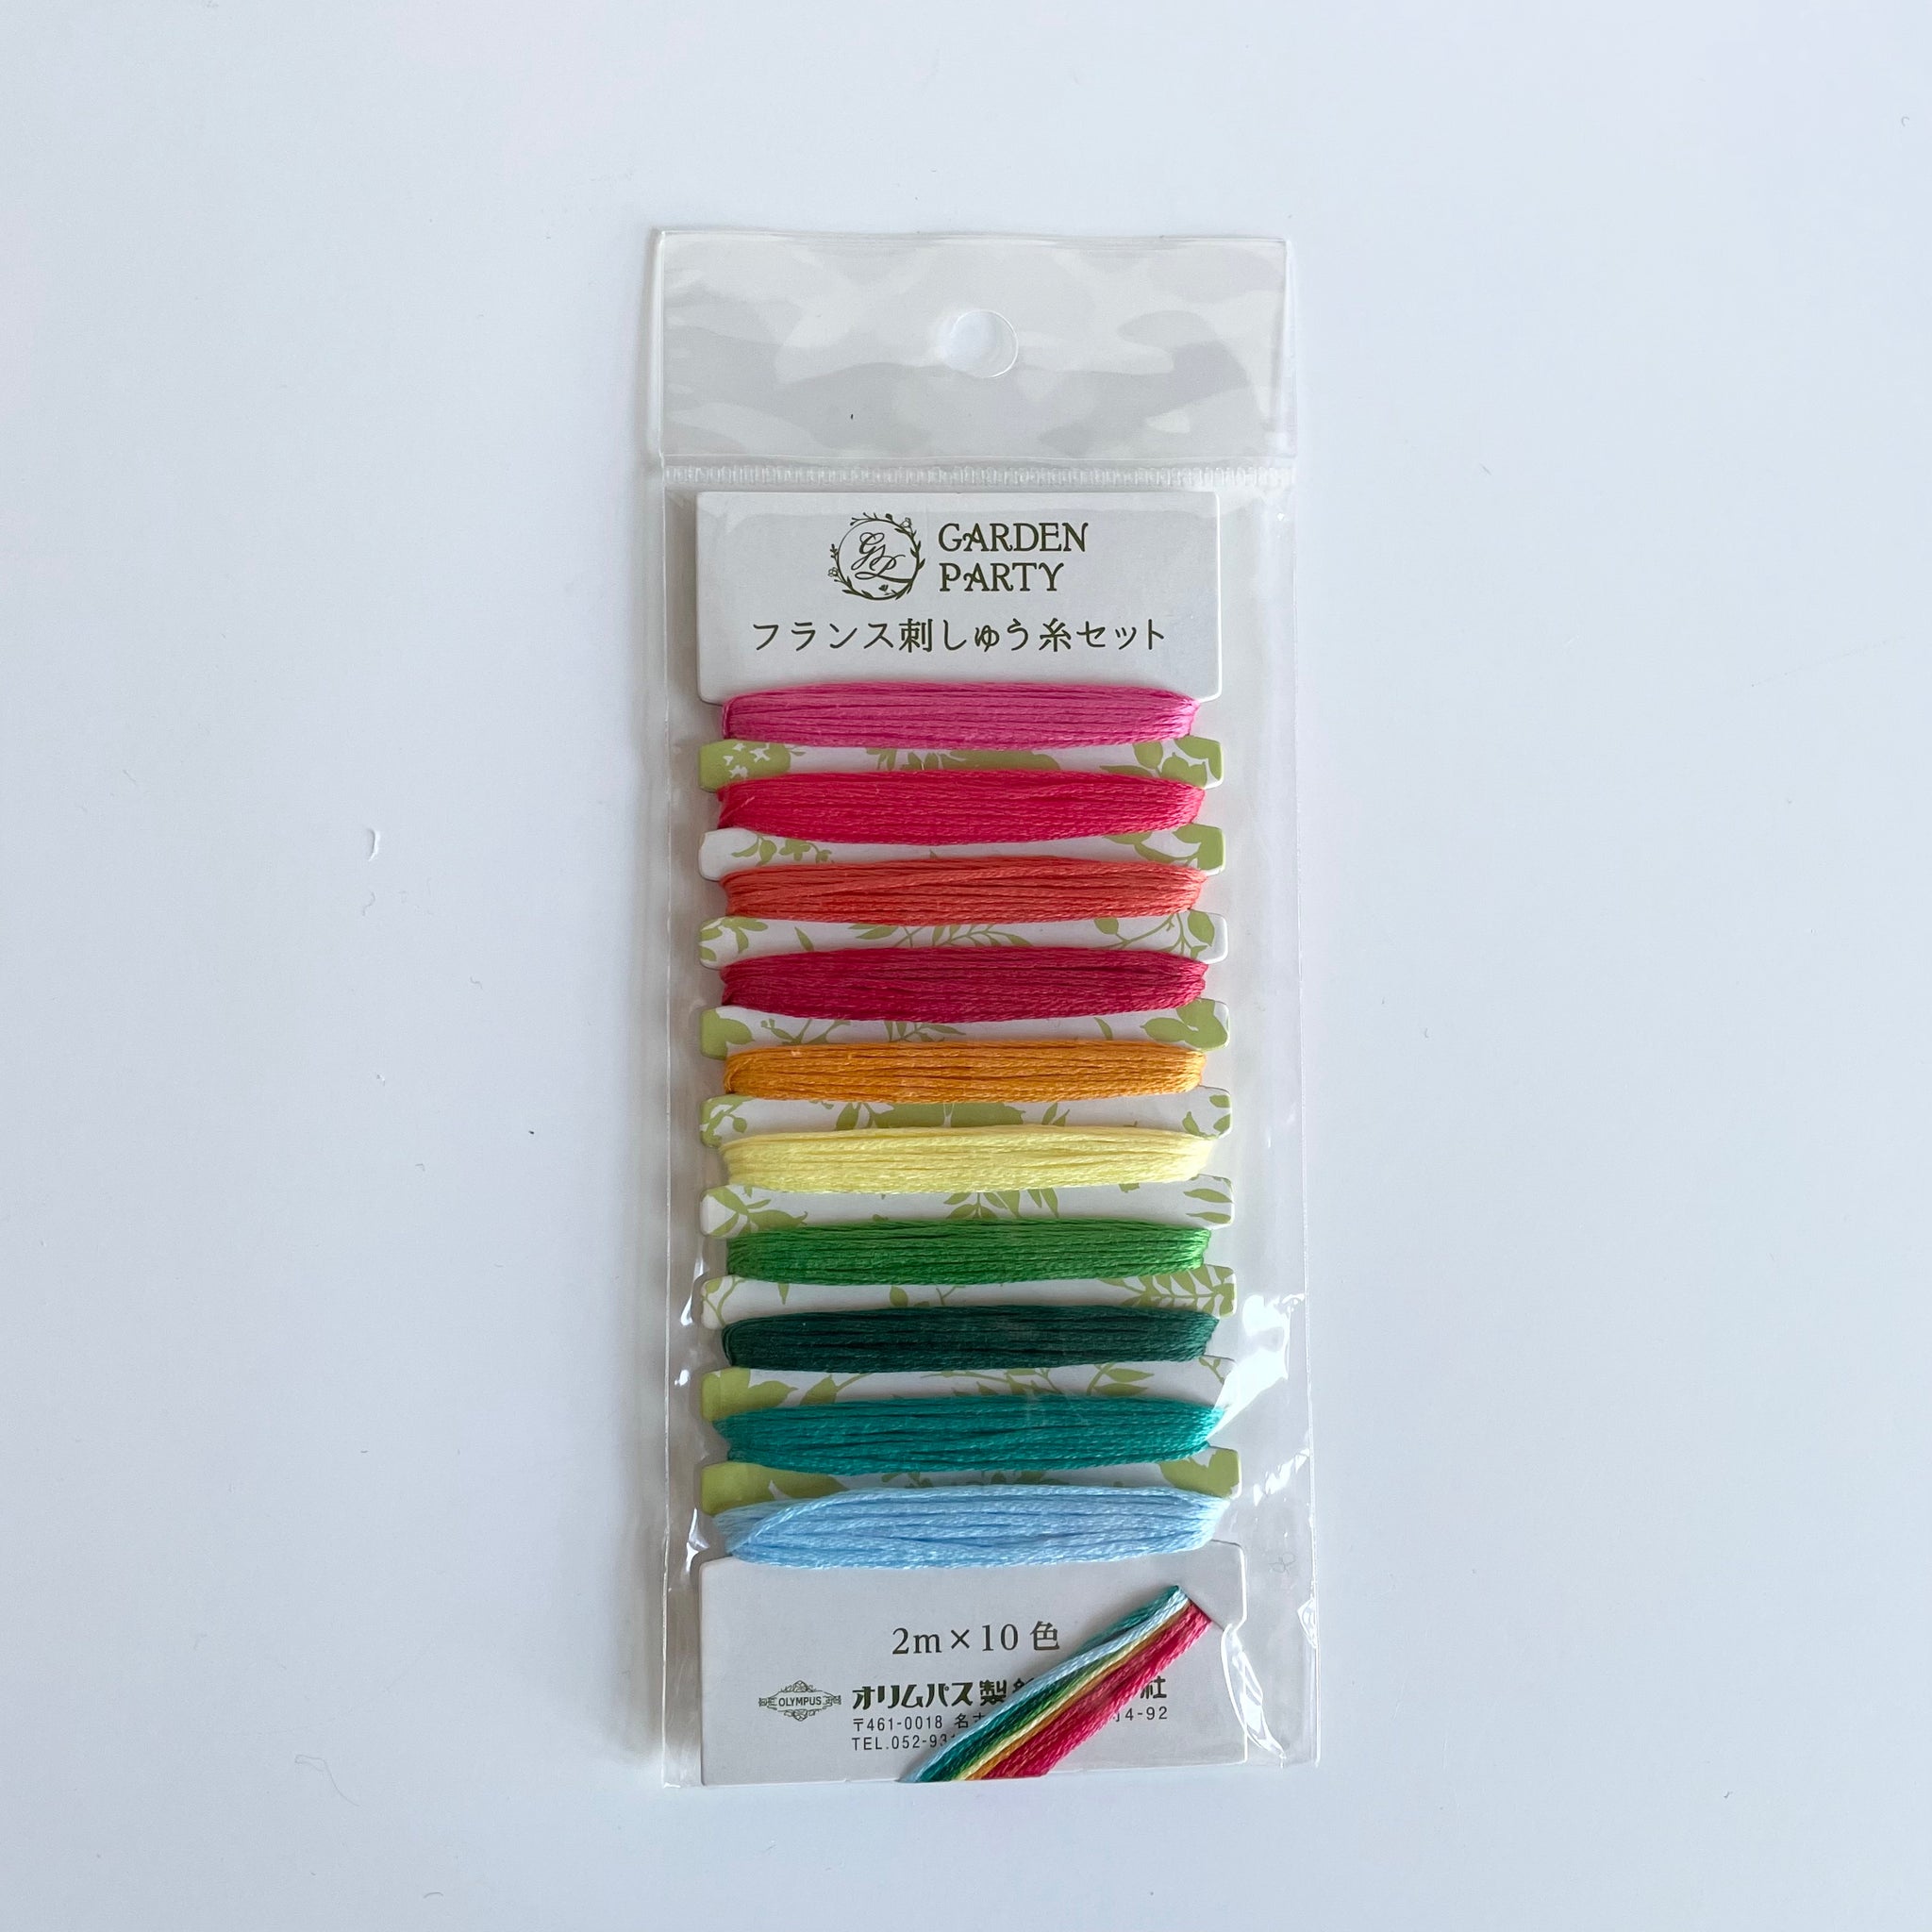 Garden Party Embroidery Floss Set - Colorway 4